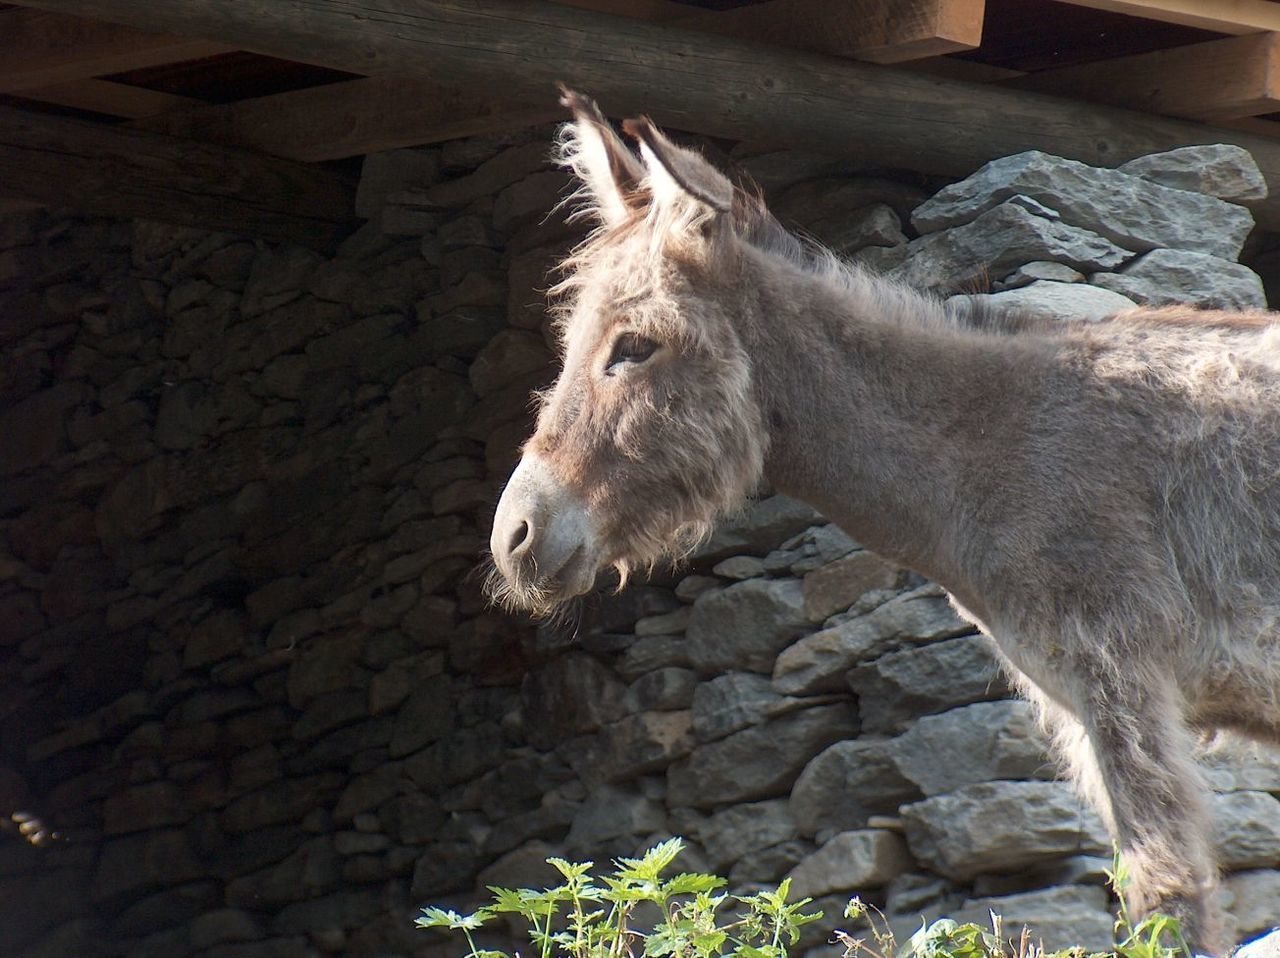 Side view of donkey against stone wall